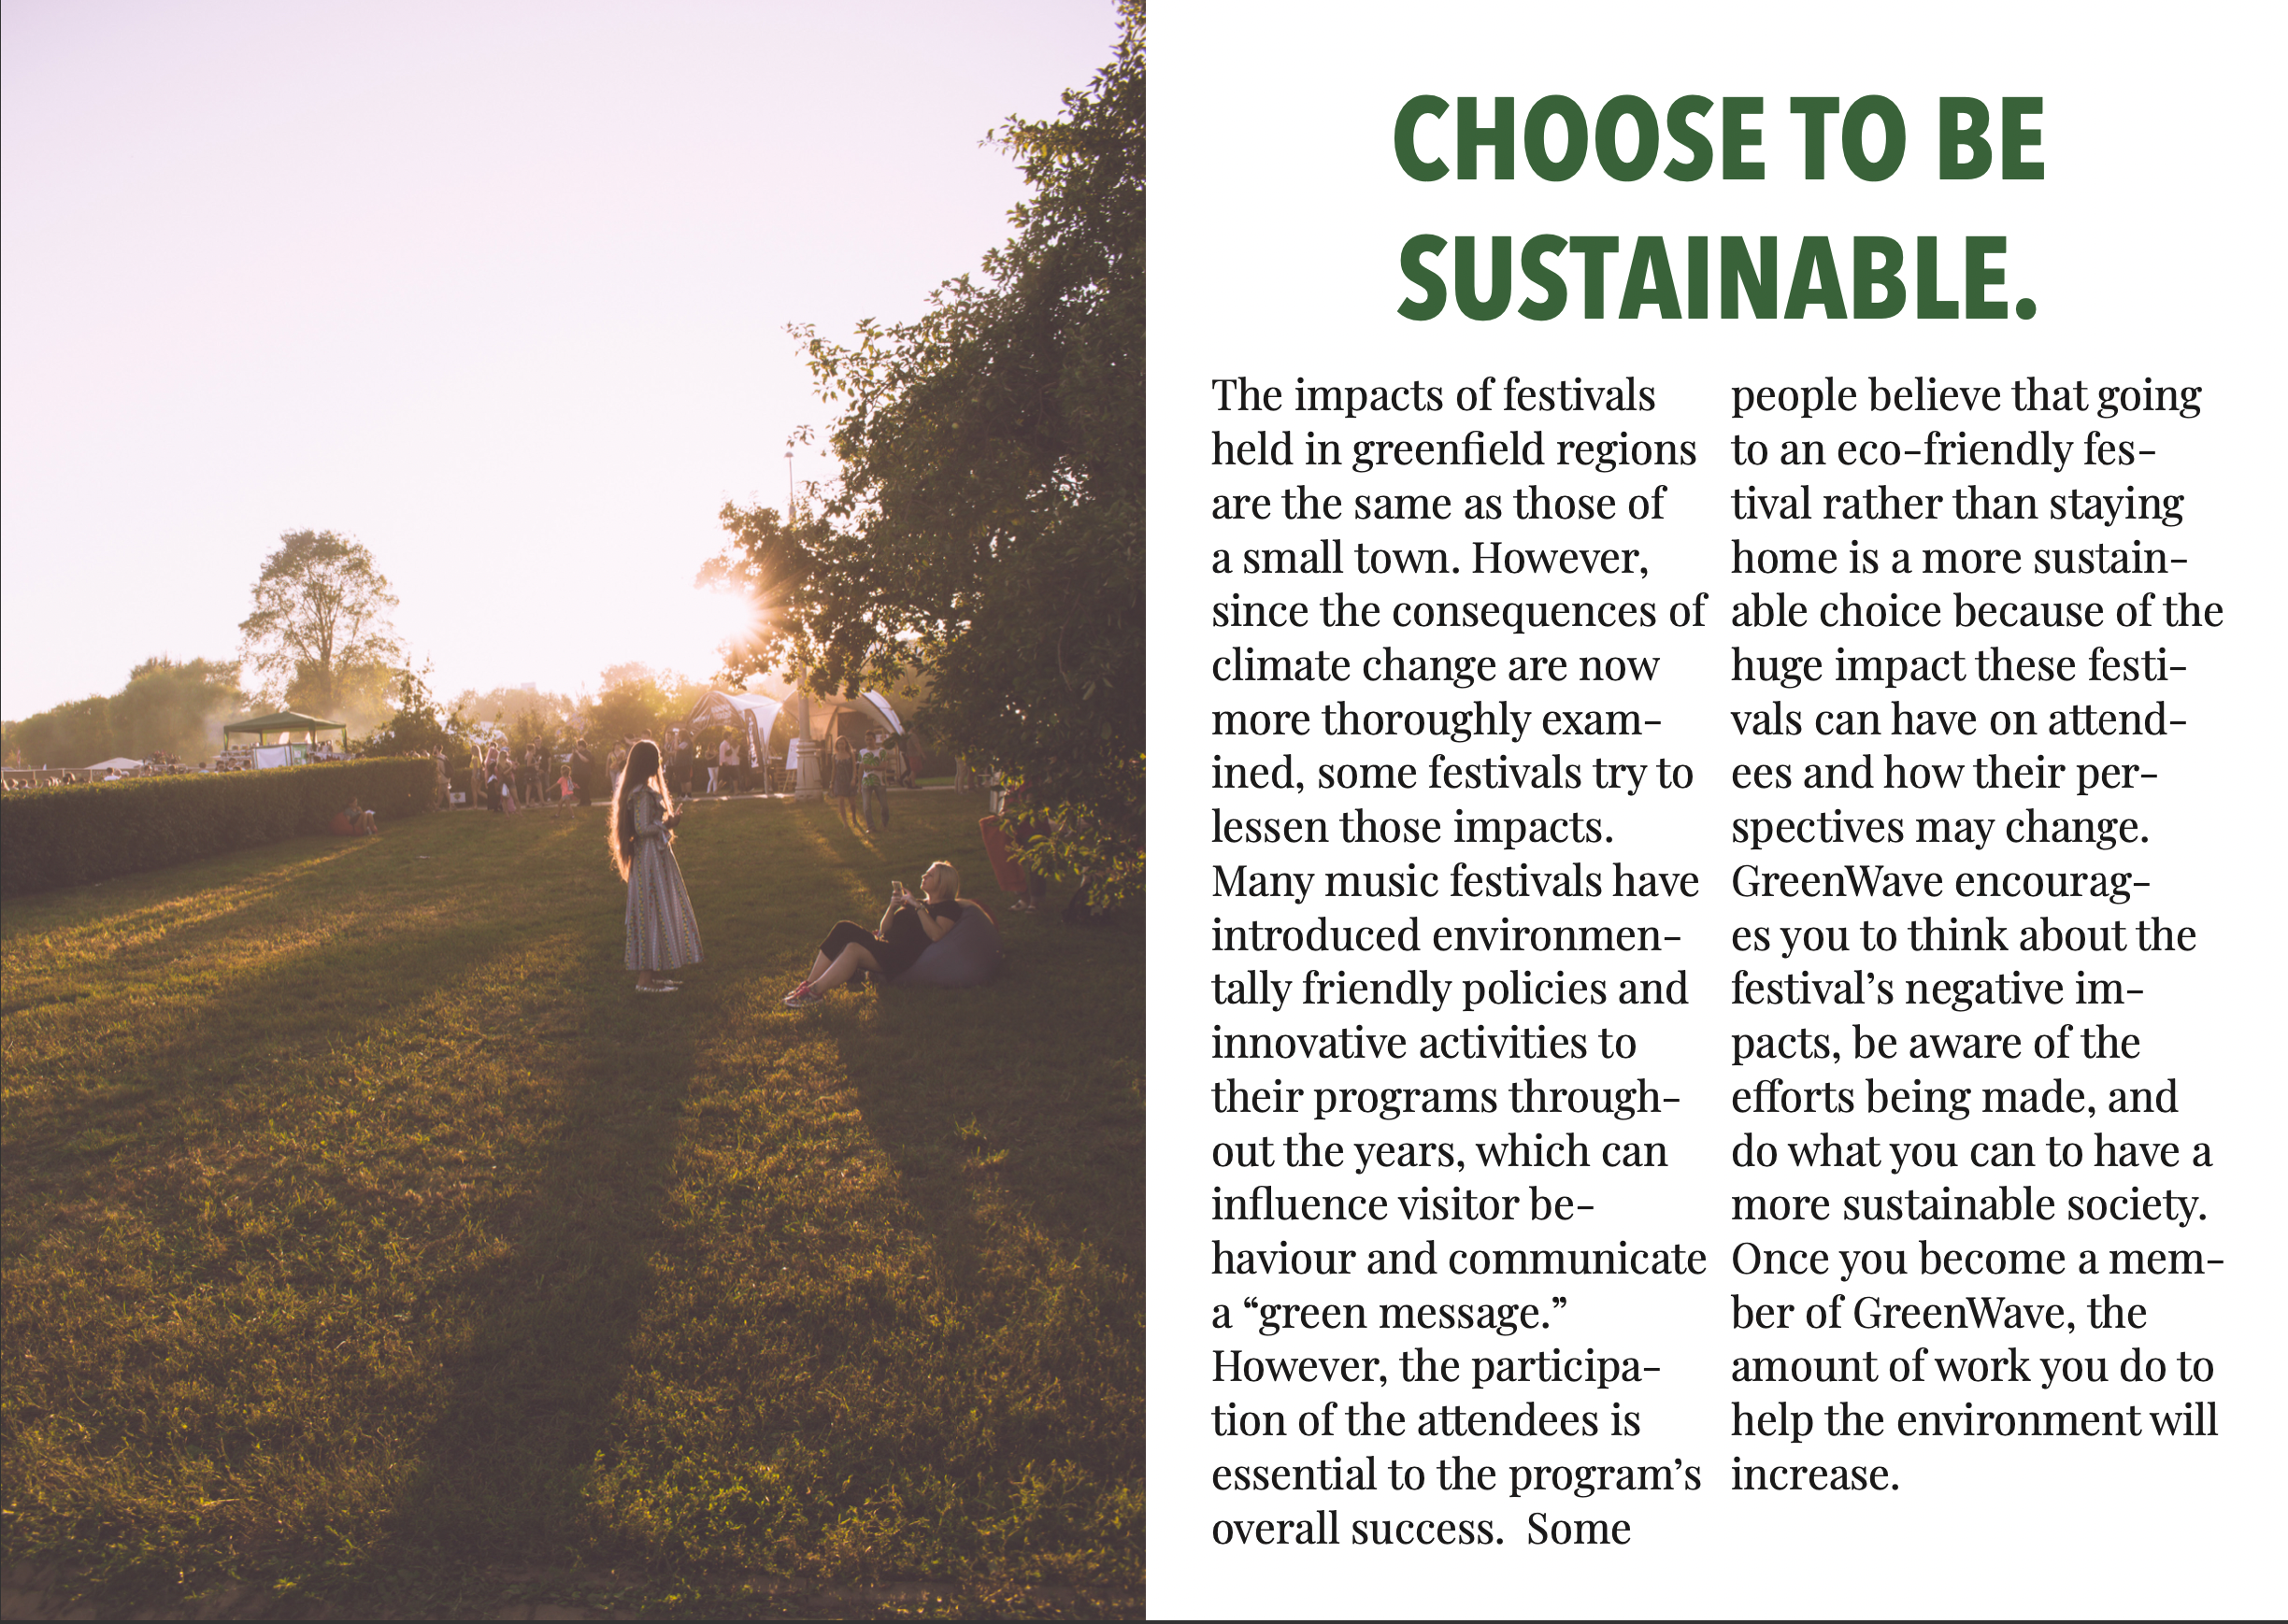 CHOOSE TO BE
SUSTAINABLE.

The impacts of festivals
held in greenfield regions
are the same as those of

a small town. However,
since the consequences of
climate change are now
more thoroughly exam-
ined, some festivals try to
lessen those impacts.
Many music festivals have
introduced environmen-
tally friendly policies and
innovative activities to
their programs through-
out the years, which can
influence visitor be-
haviour and communicate
a “green message.”
However, the participa-
tion of the attendees is
essential to the program’s
overall success. Some

people believe that going
to an eco-friendly fes-
tival rather than staying
home is a more sustain-
able choice because of the
huge impact these festi-
vals can have on attend-
ees and how their per-
spectives may change.
sreenWave encourag-
es you to think about the
festival's negative im-
pacts, be aware of the
efforts being made, and
do what you can to have a
more sustainable society.
Once you become a mem-
ber of GreenWave, the
amount of work you do to
help the environment will
increase.